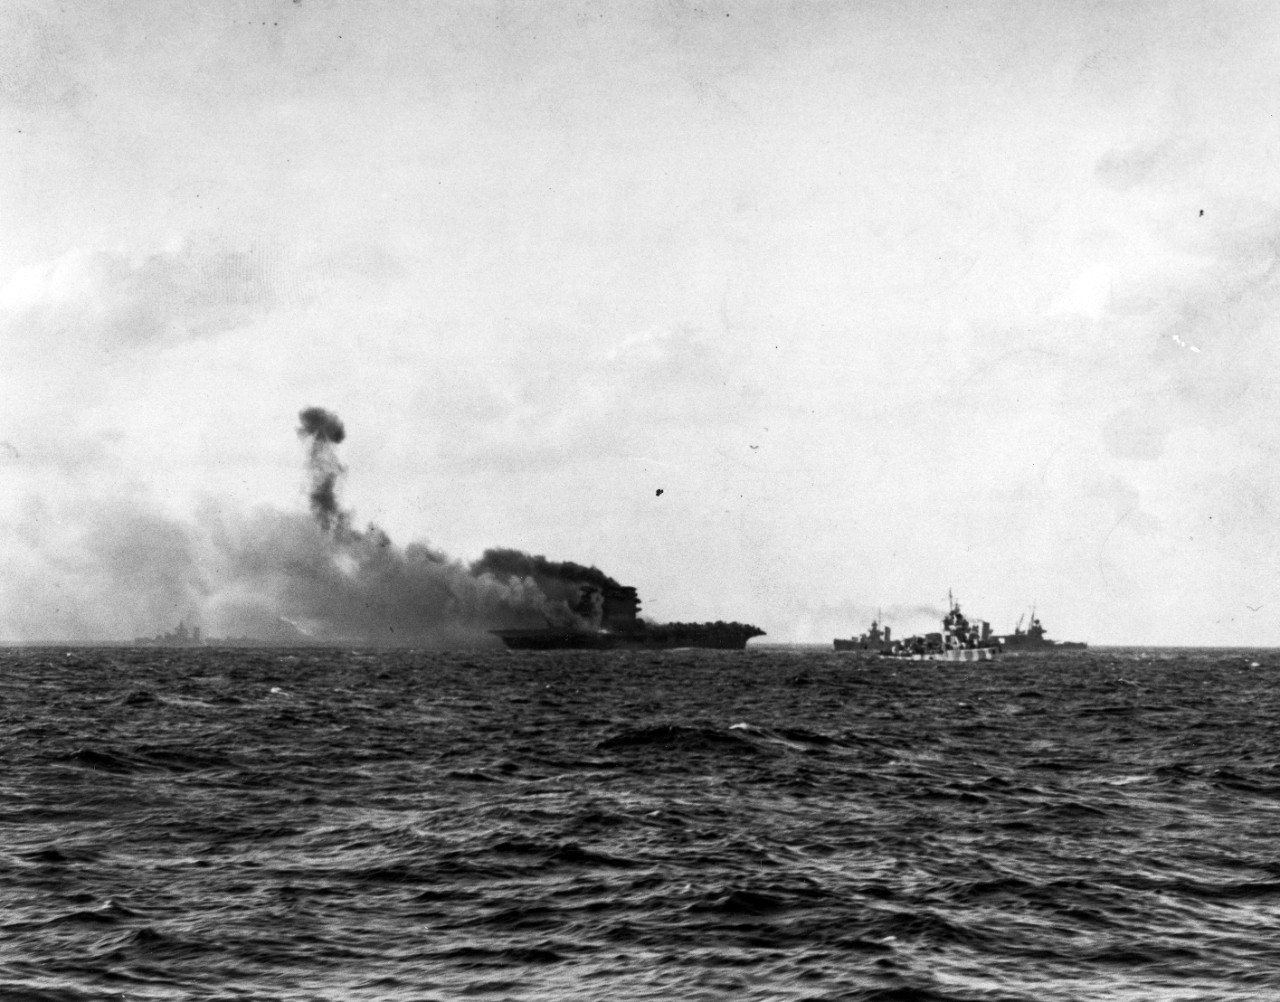 Photo #: 80-G-16669  Battle of the Coral Sea, May 1942